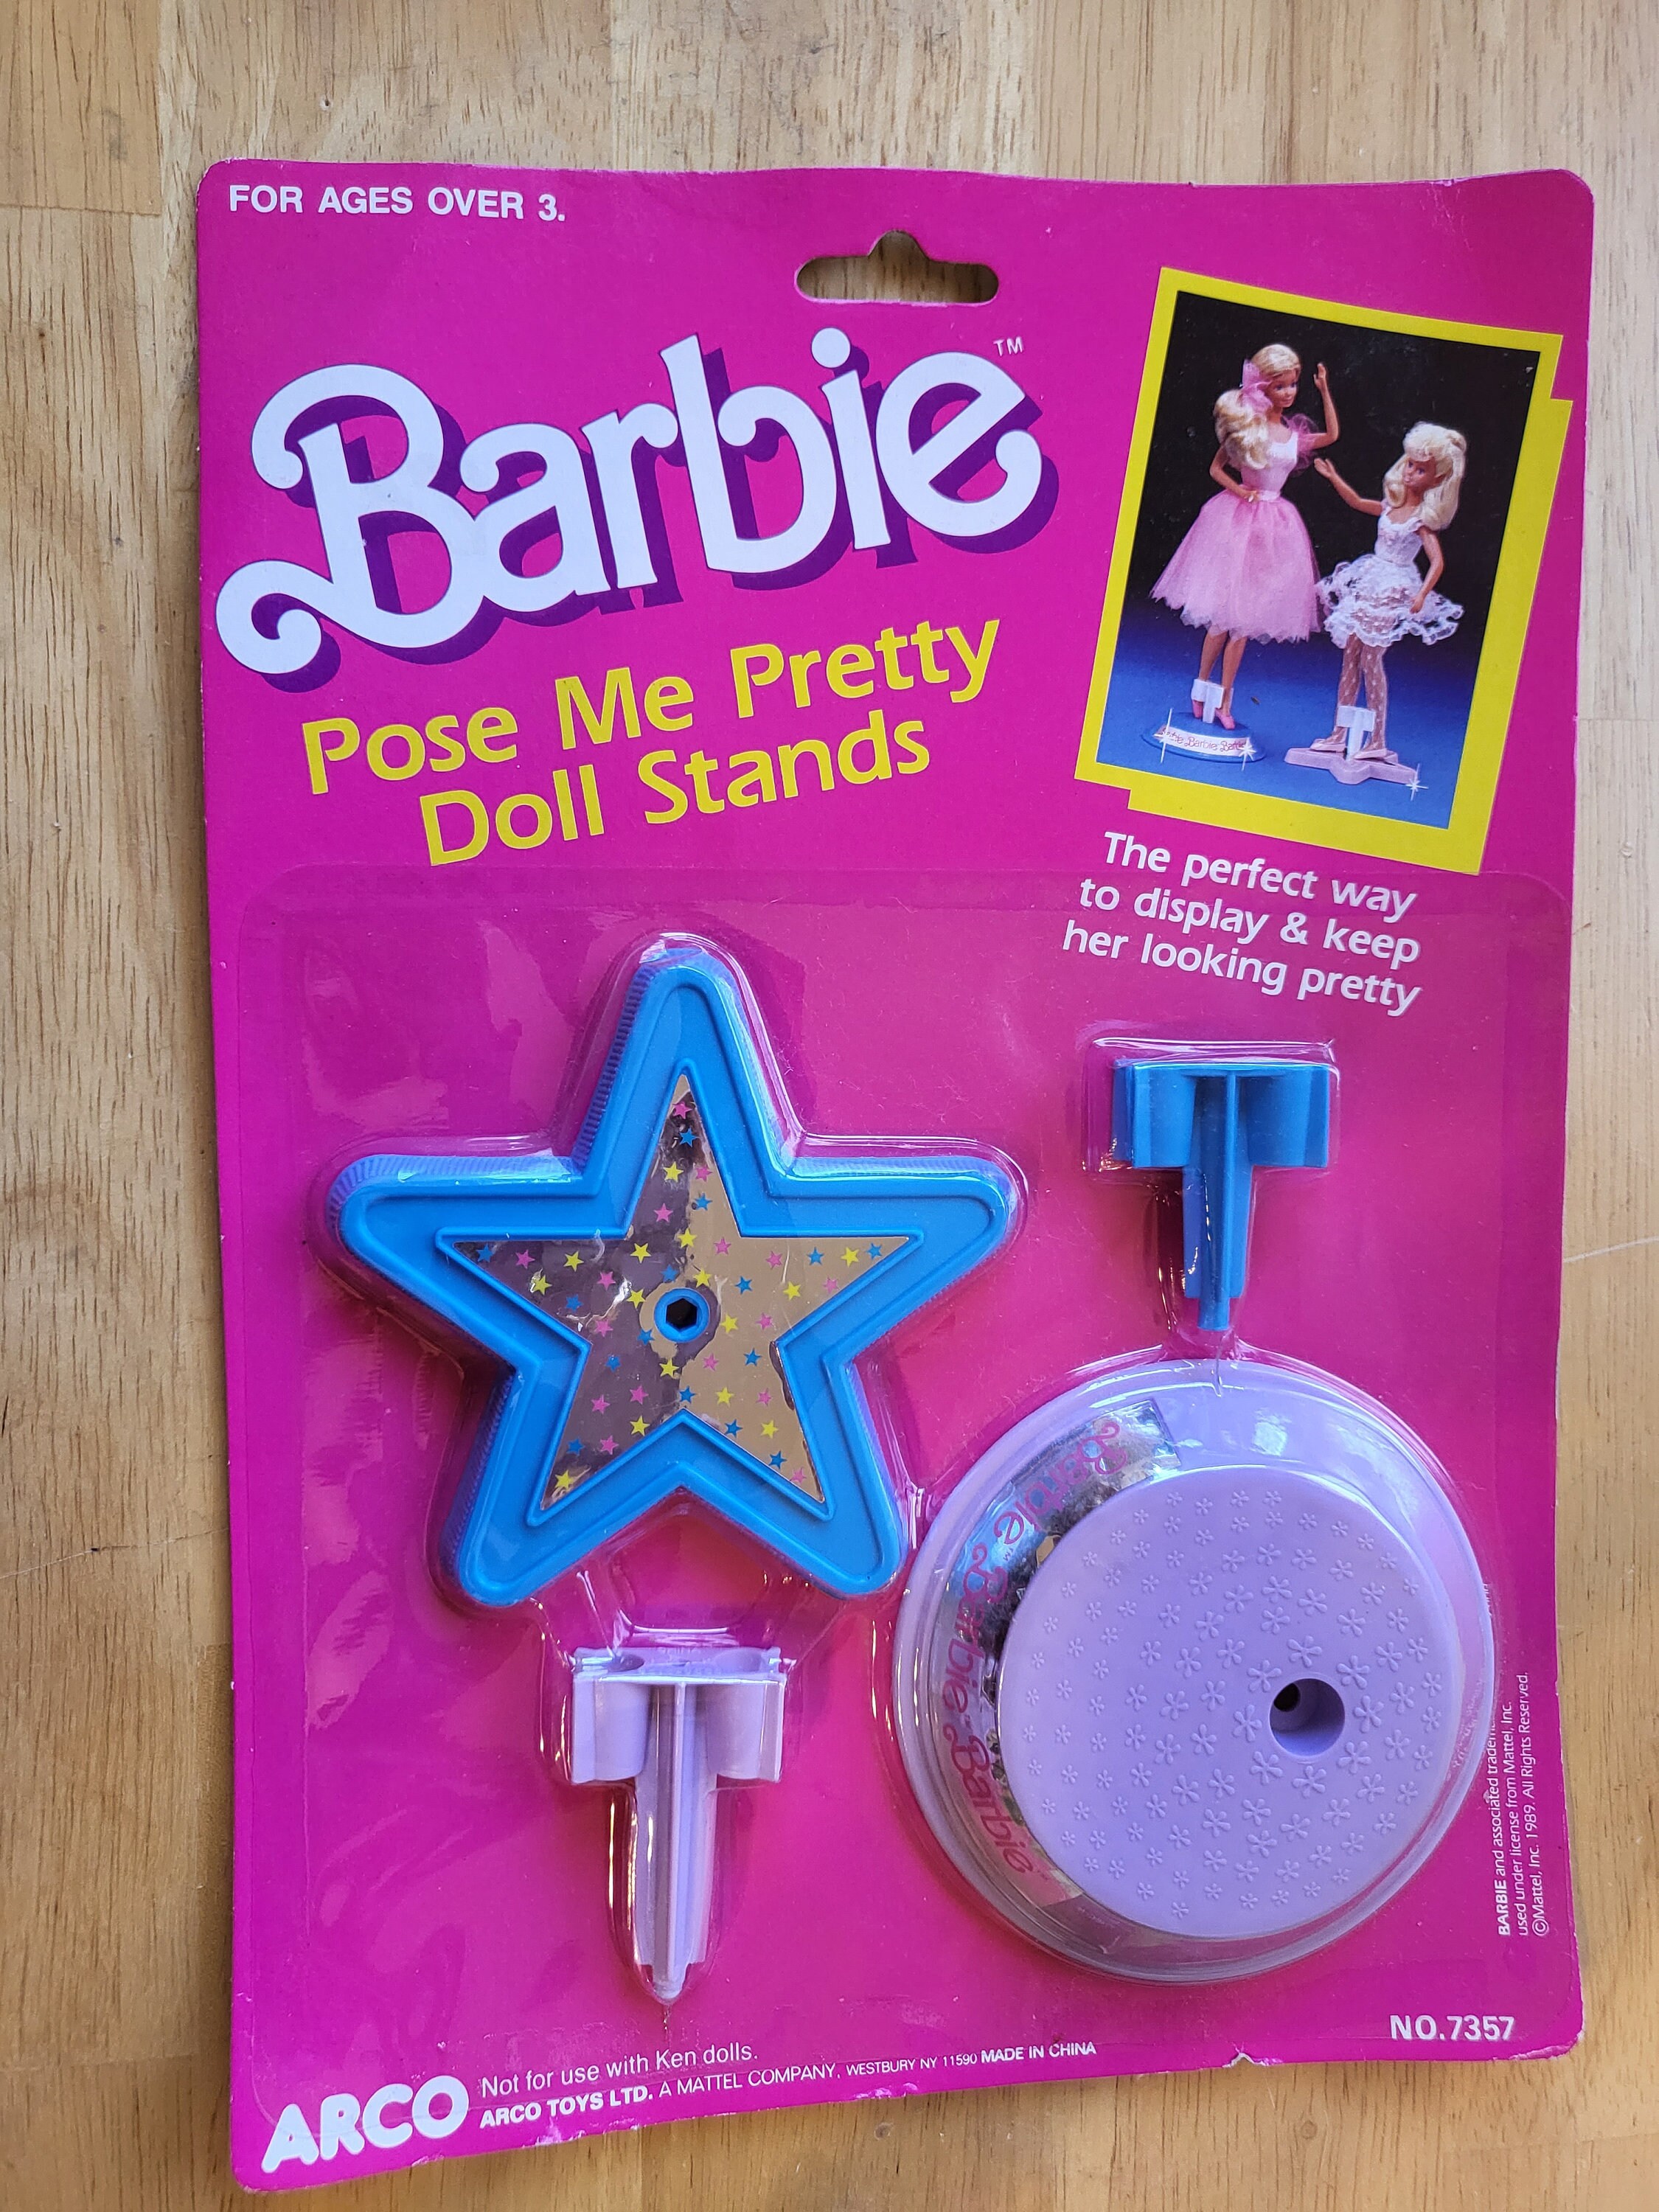 Vintage Barbie Doll Stands Pose Me Pretty Doll Stands 1989 